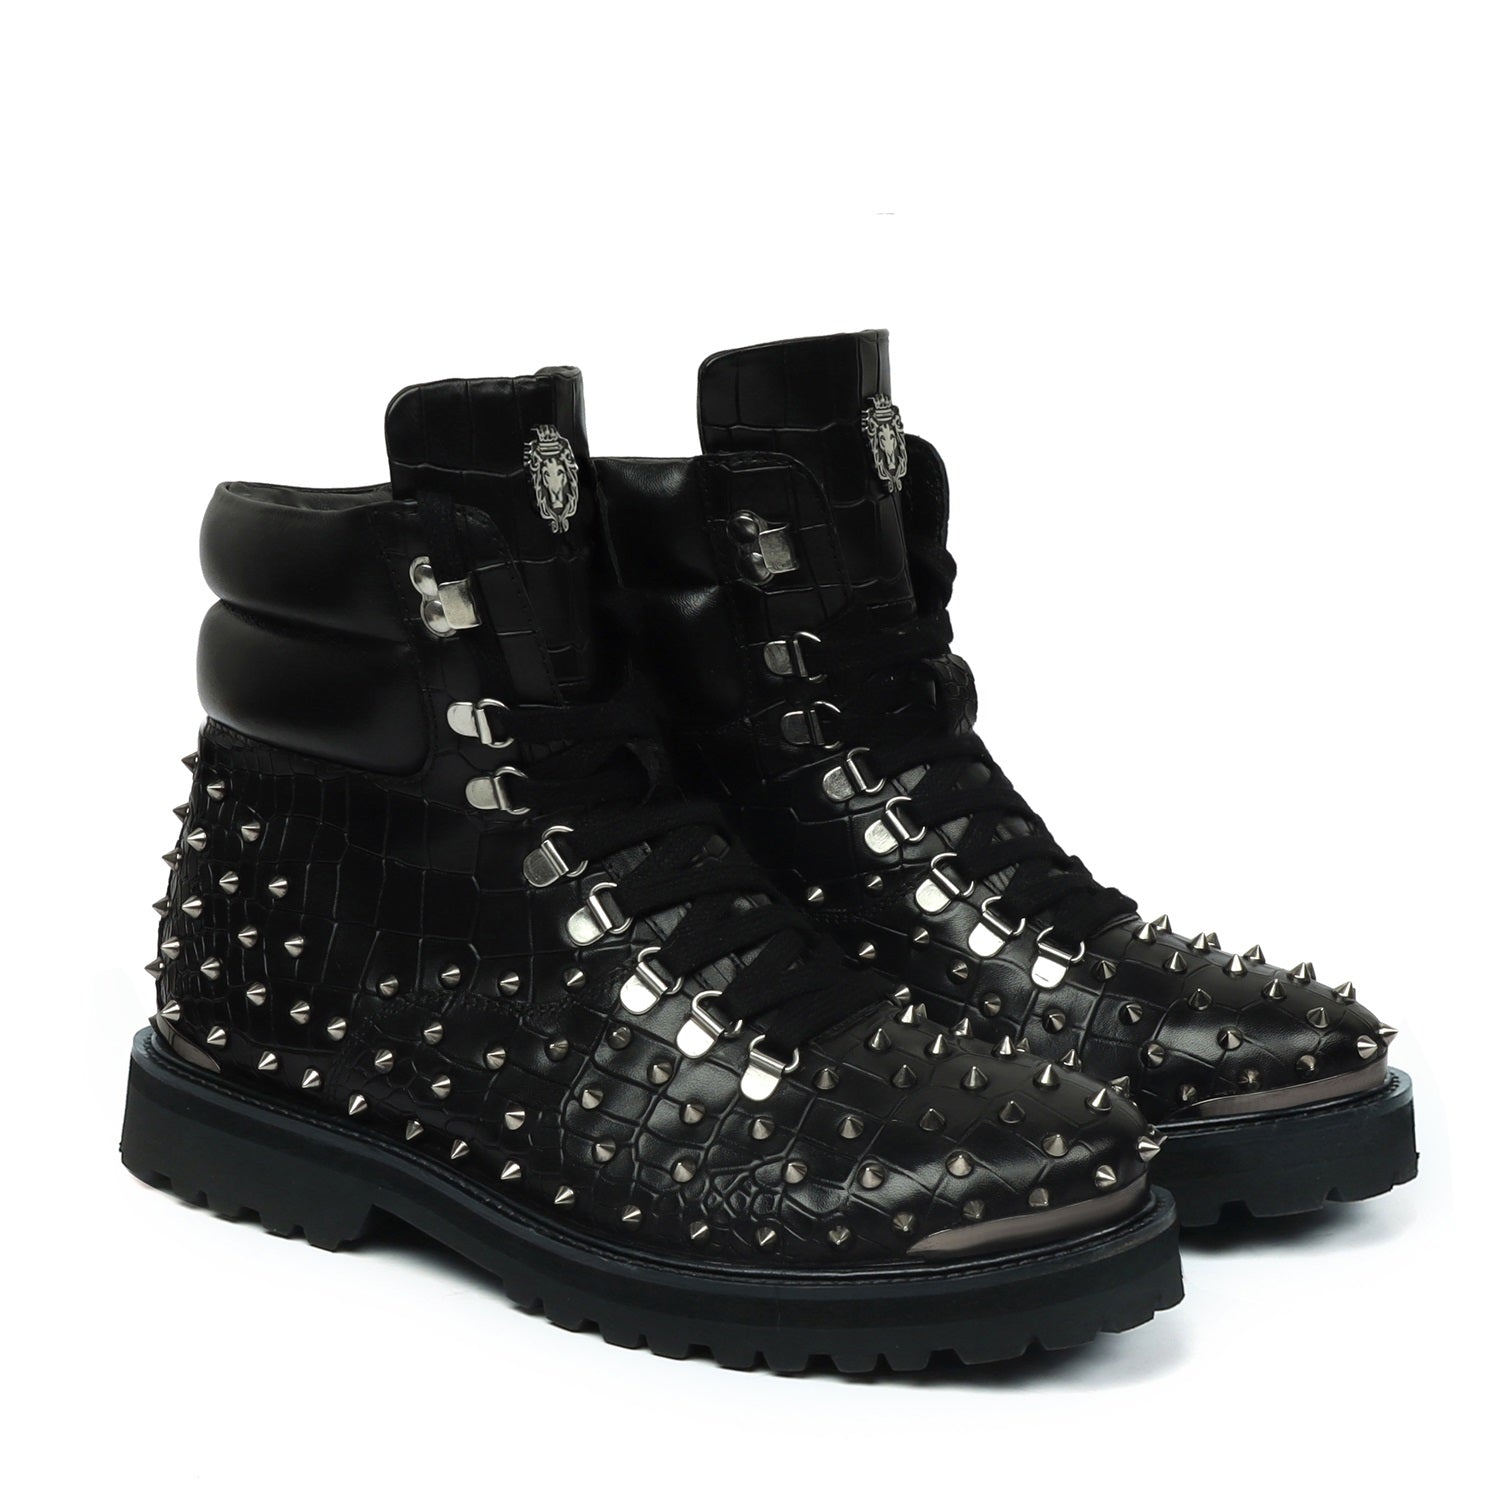 Black Deep Cut Croco Leather with silver stud Ultra Light Weight Biker Boots by Brune & Bareskin